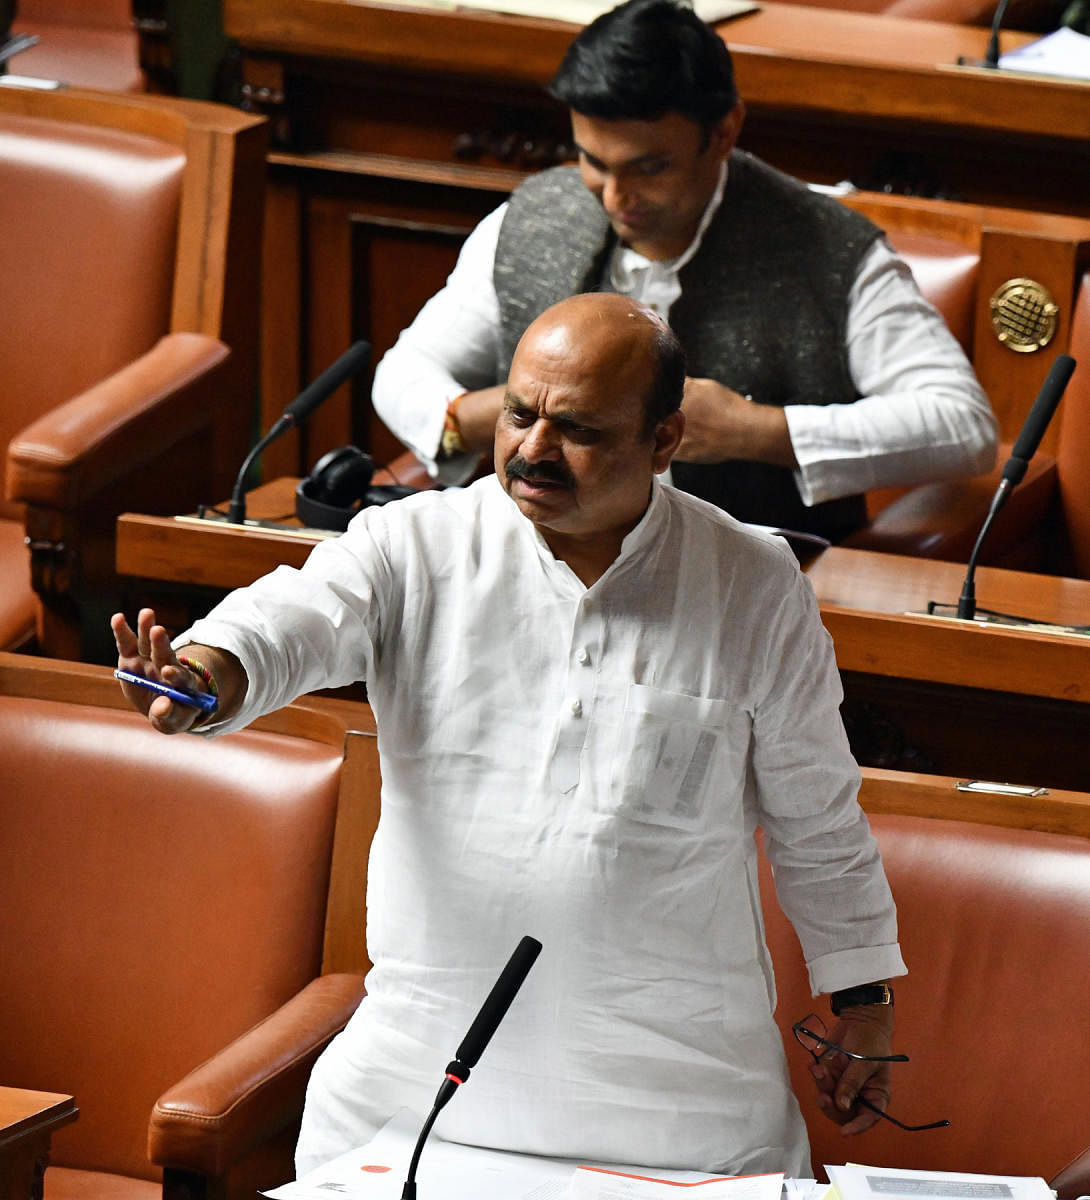 Home Minister Basavaraj Bommai told the Legislative Assembly that the government will not order a judicial inquiry, as demanded by the Opposition, into the December 19 police firing in Mangaluru during anti-CAA protests that killed two people.  